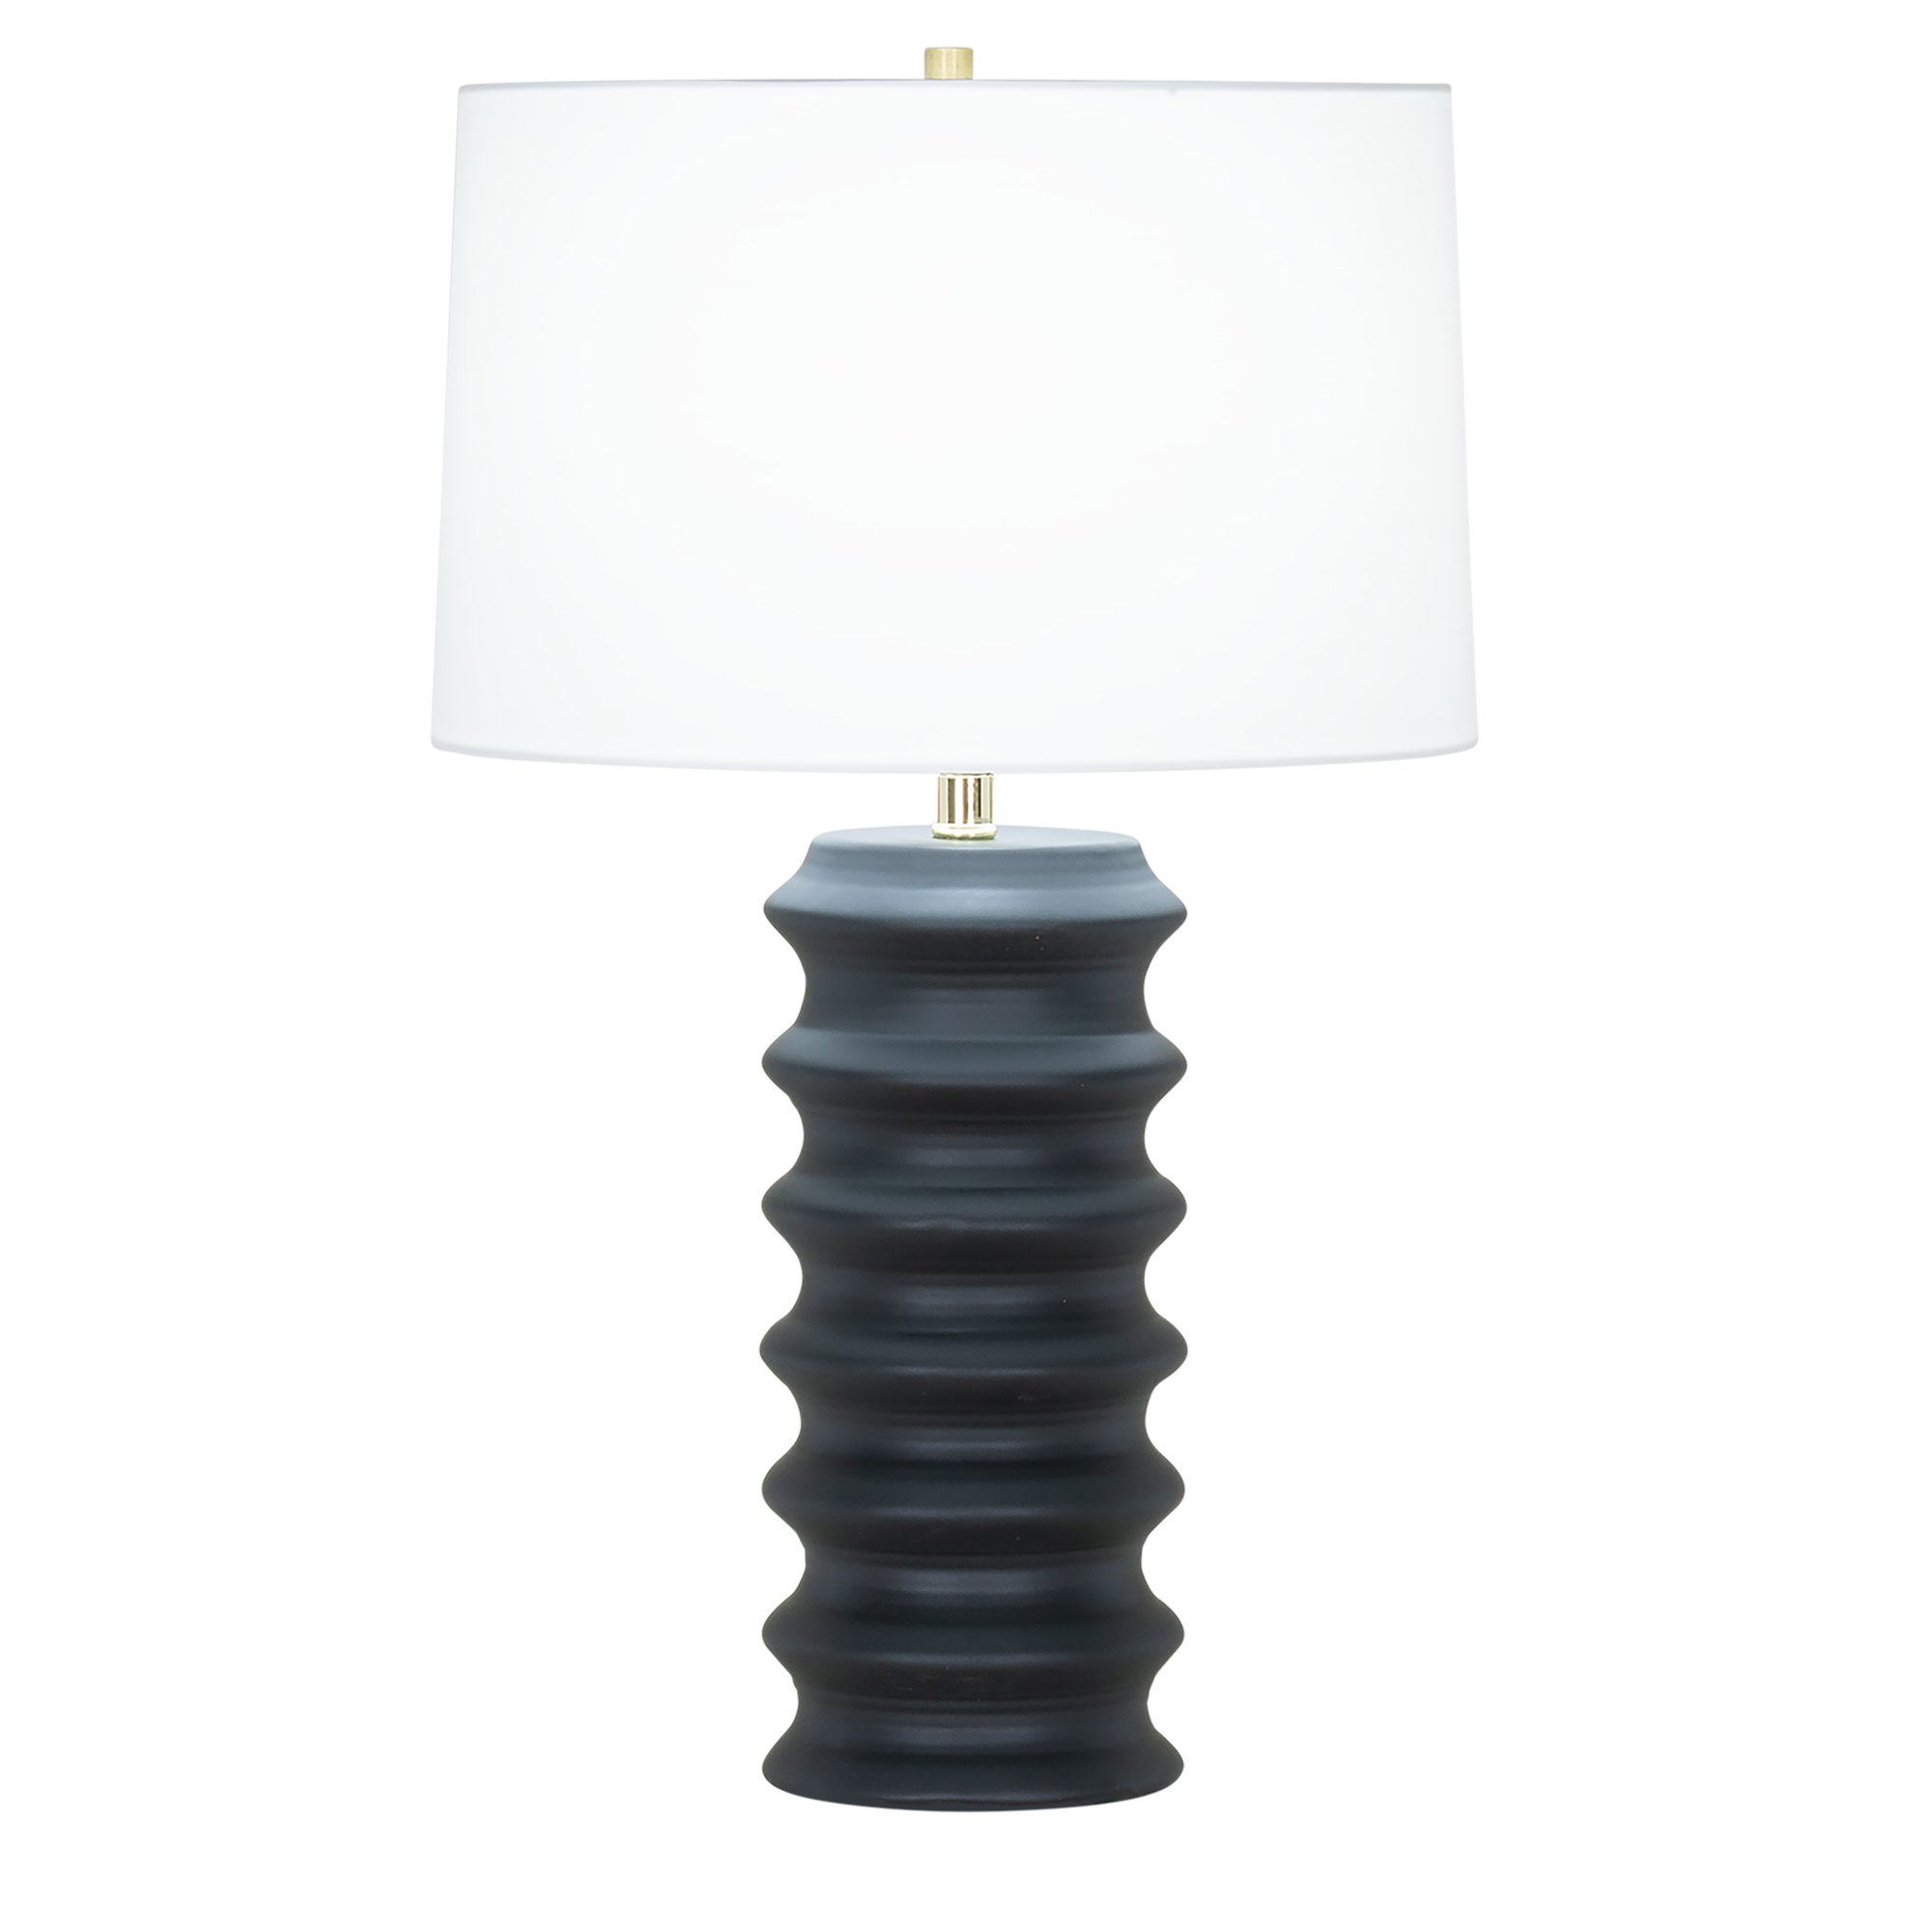 Stylish and sophisticated, this table lamp is a statement piece.